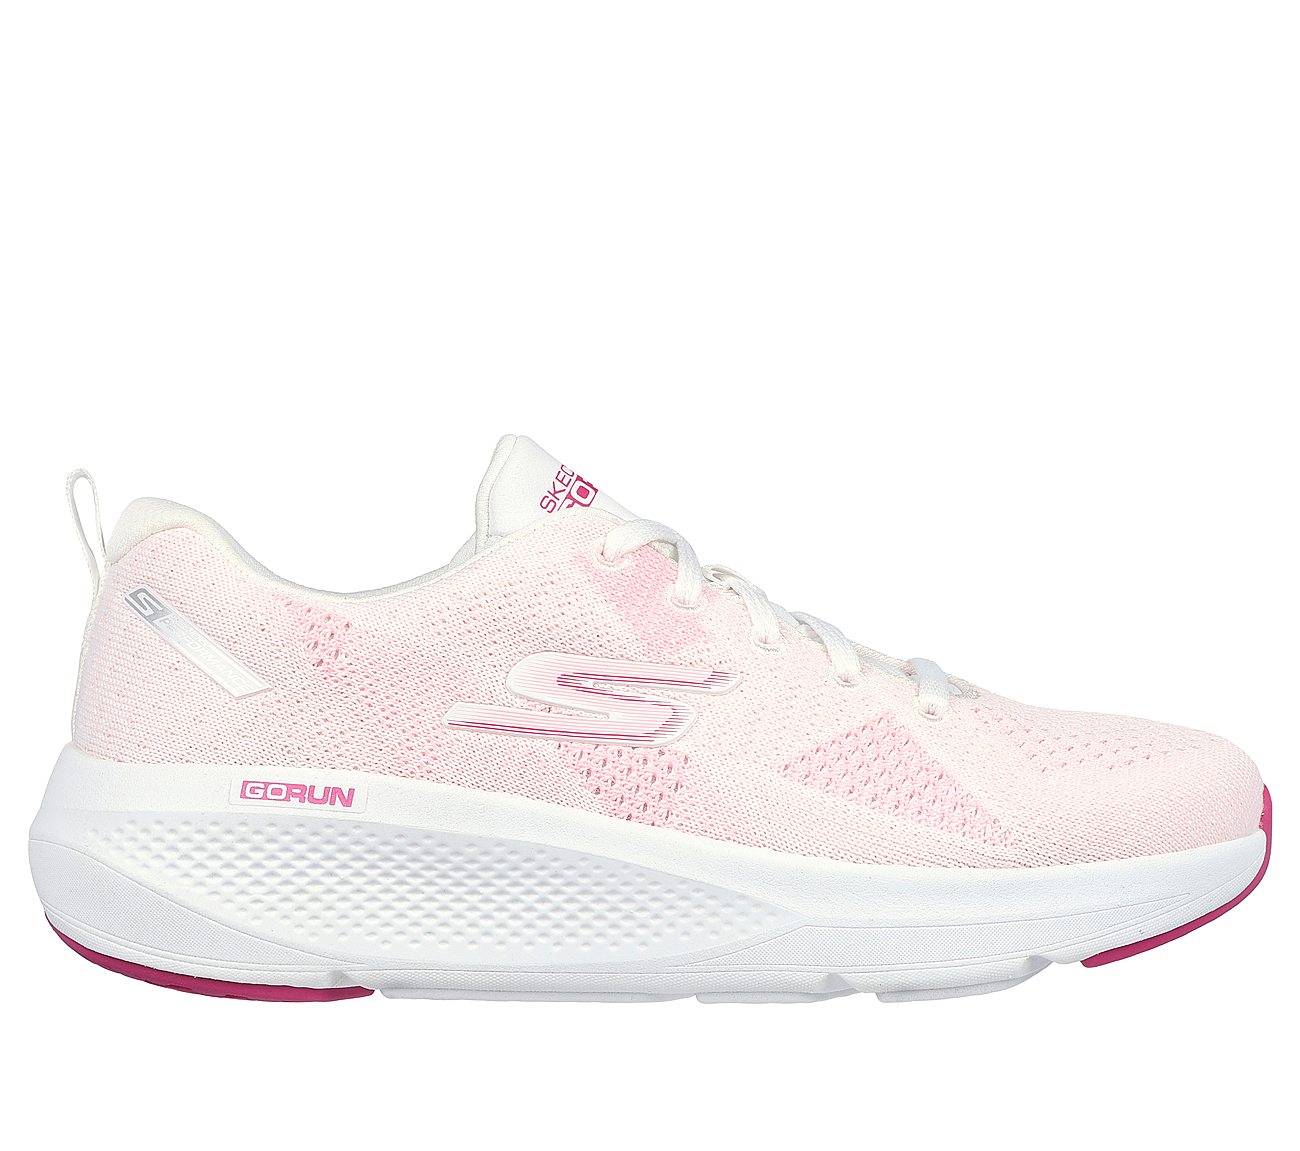 GO RUN ELEVATE, WHITE/PINK Footwear Lateral View